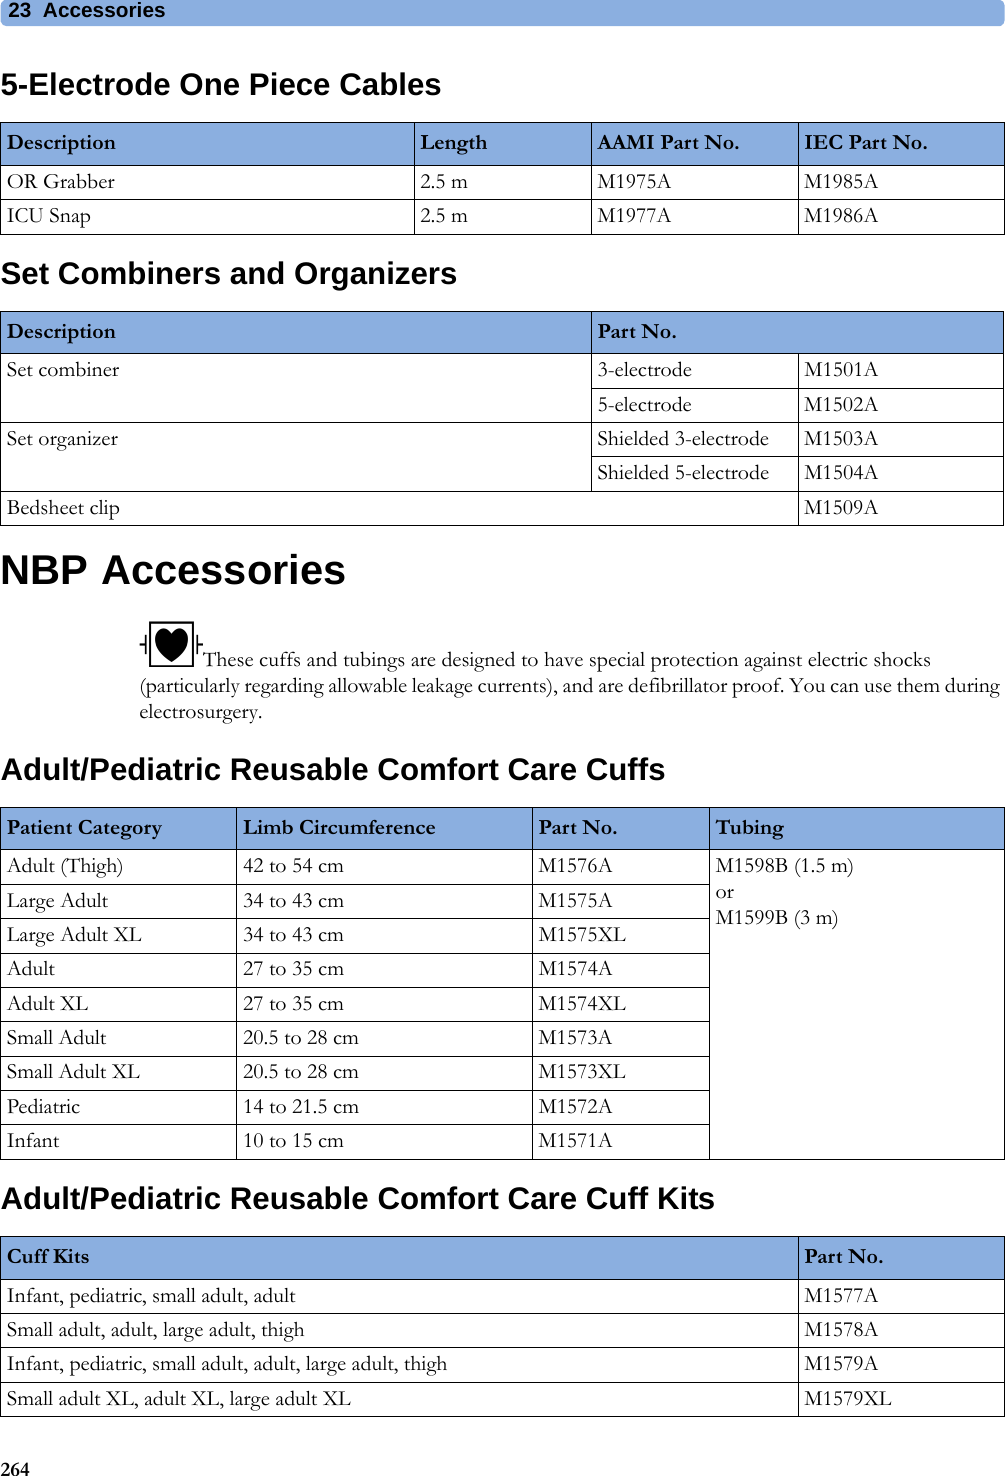 23 Accessories2645-Electrode One Piece CablesSet Combiners and OrganizersNBP AccessoriesThese cuffs and tubings are designed to have special protection against electric shocks (particularly regarding allowable leakage currents), and are defibrillator proof. You can use them during electrosurgery.Adult/Pediatric Reusable Comfort Care CuffsAdult/Pediatric Reusable Comfort Care Cuff KitsDescription Length AAMI Part No. IEC Part No.OR Grabber 2.5 m M1975A M1985AICU Snap 2.5 m M1977A M1986ADescription Part No.Set combiner 3-electrode M1501A5-electrode M1502ASet organizer Shielded 3-electrode M1503AShielded 5-electrode M1504ABedsheet clip M1509APatient Category Limb Circumference Part No. TubingAdult (Thigh) 42 to 54 cm M1576A M1598B (1.5 m)orM1599B (3 m)Large Adult 34 to 43 cm M1575ALarge Adult XL 34 to 43 cm M1575XLAdult 27 to 35 cm M1574AAdult XL 27 to 35 cm M1574XLSmall Adult 20.5 to 28 cm M1573ASmall Adult XL 20.5 to 28 cm M1573XLPediatric 14 to 21.5 cm M1572AInfant 10 to 15 cm M1571ACuff Kits Part No.Infant, pediatric, small adult, adult M1577ASmall adult, adult, large adult, thigh M1578AInfant, pediatric, small adult, adult, large adult, thigh M1579ASmall adult XL, adult XL, large adult XL M1579XL